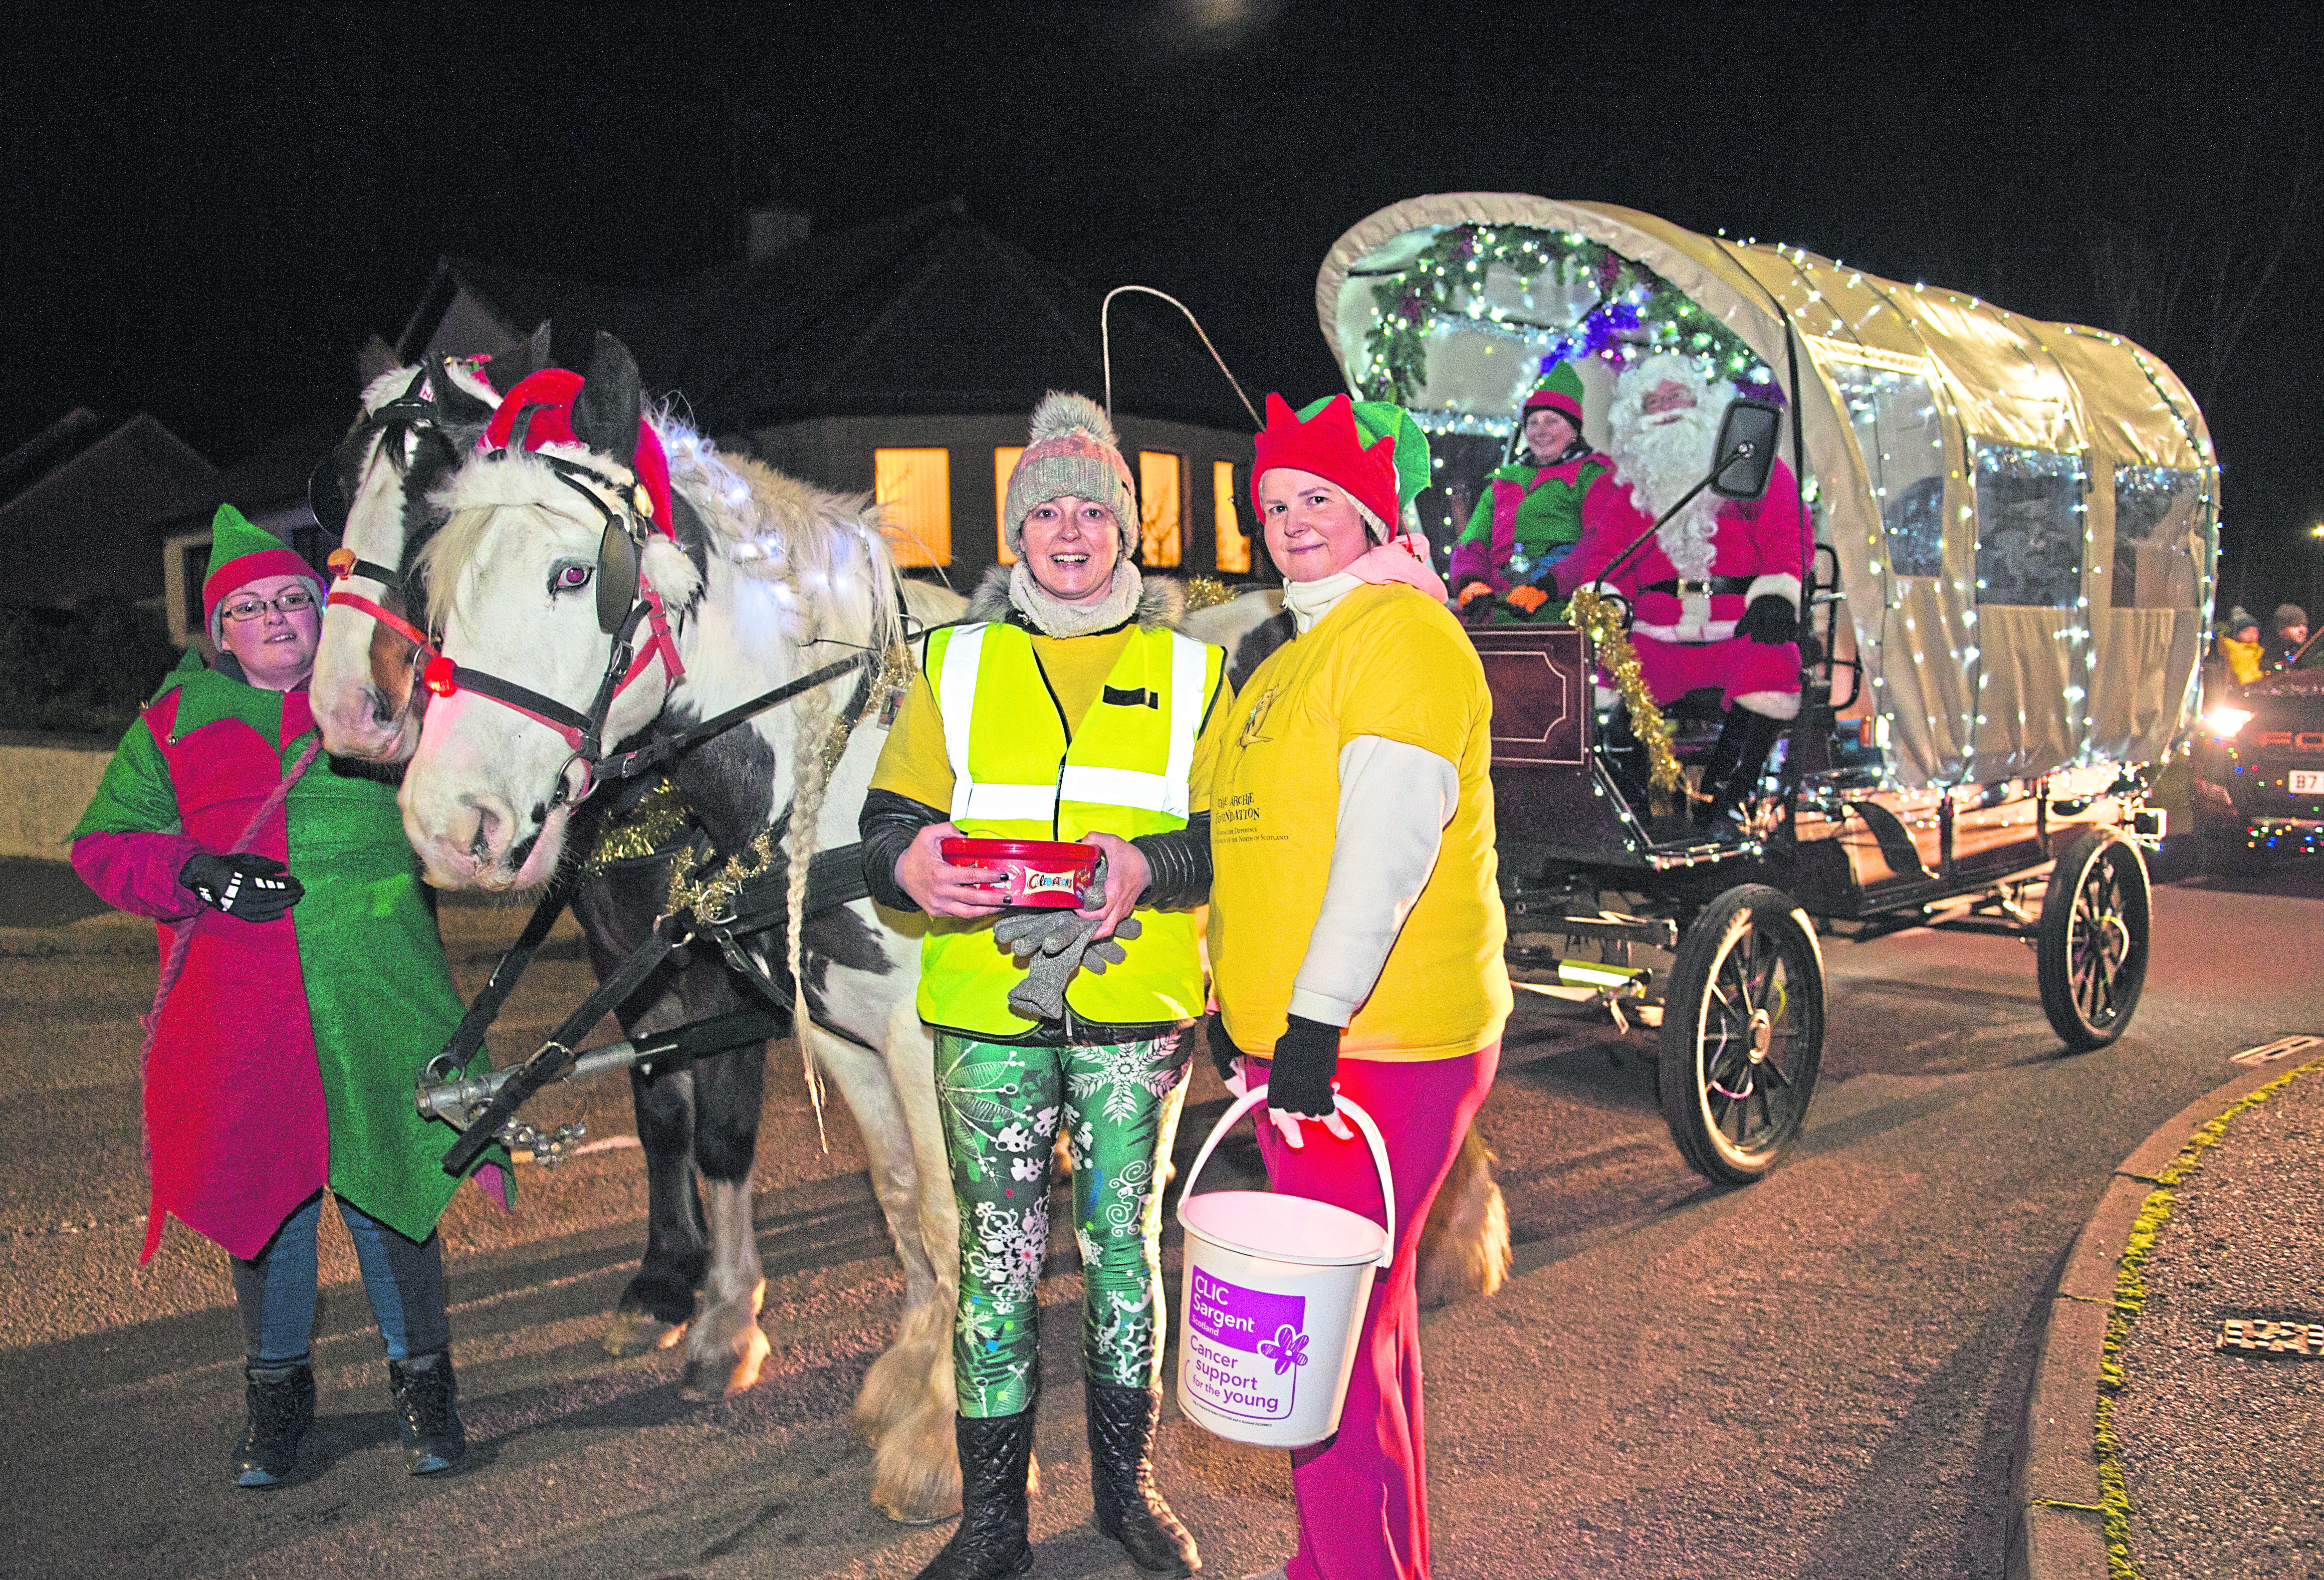 Yvonne Milton (left) and Janice Gregor (right) from 'Santa on the streets' are pictured in Elgin pounding the streets raising money for charity.